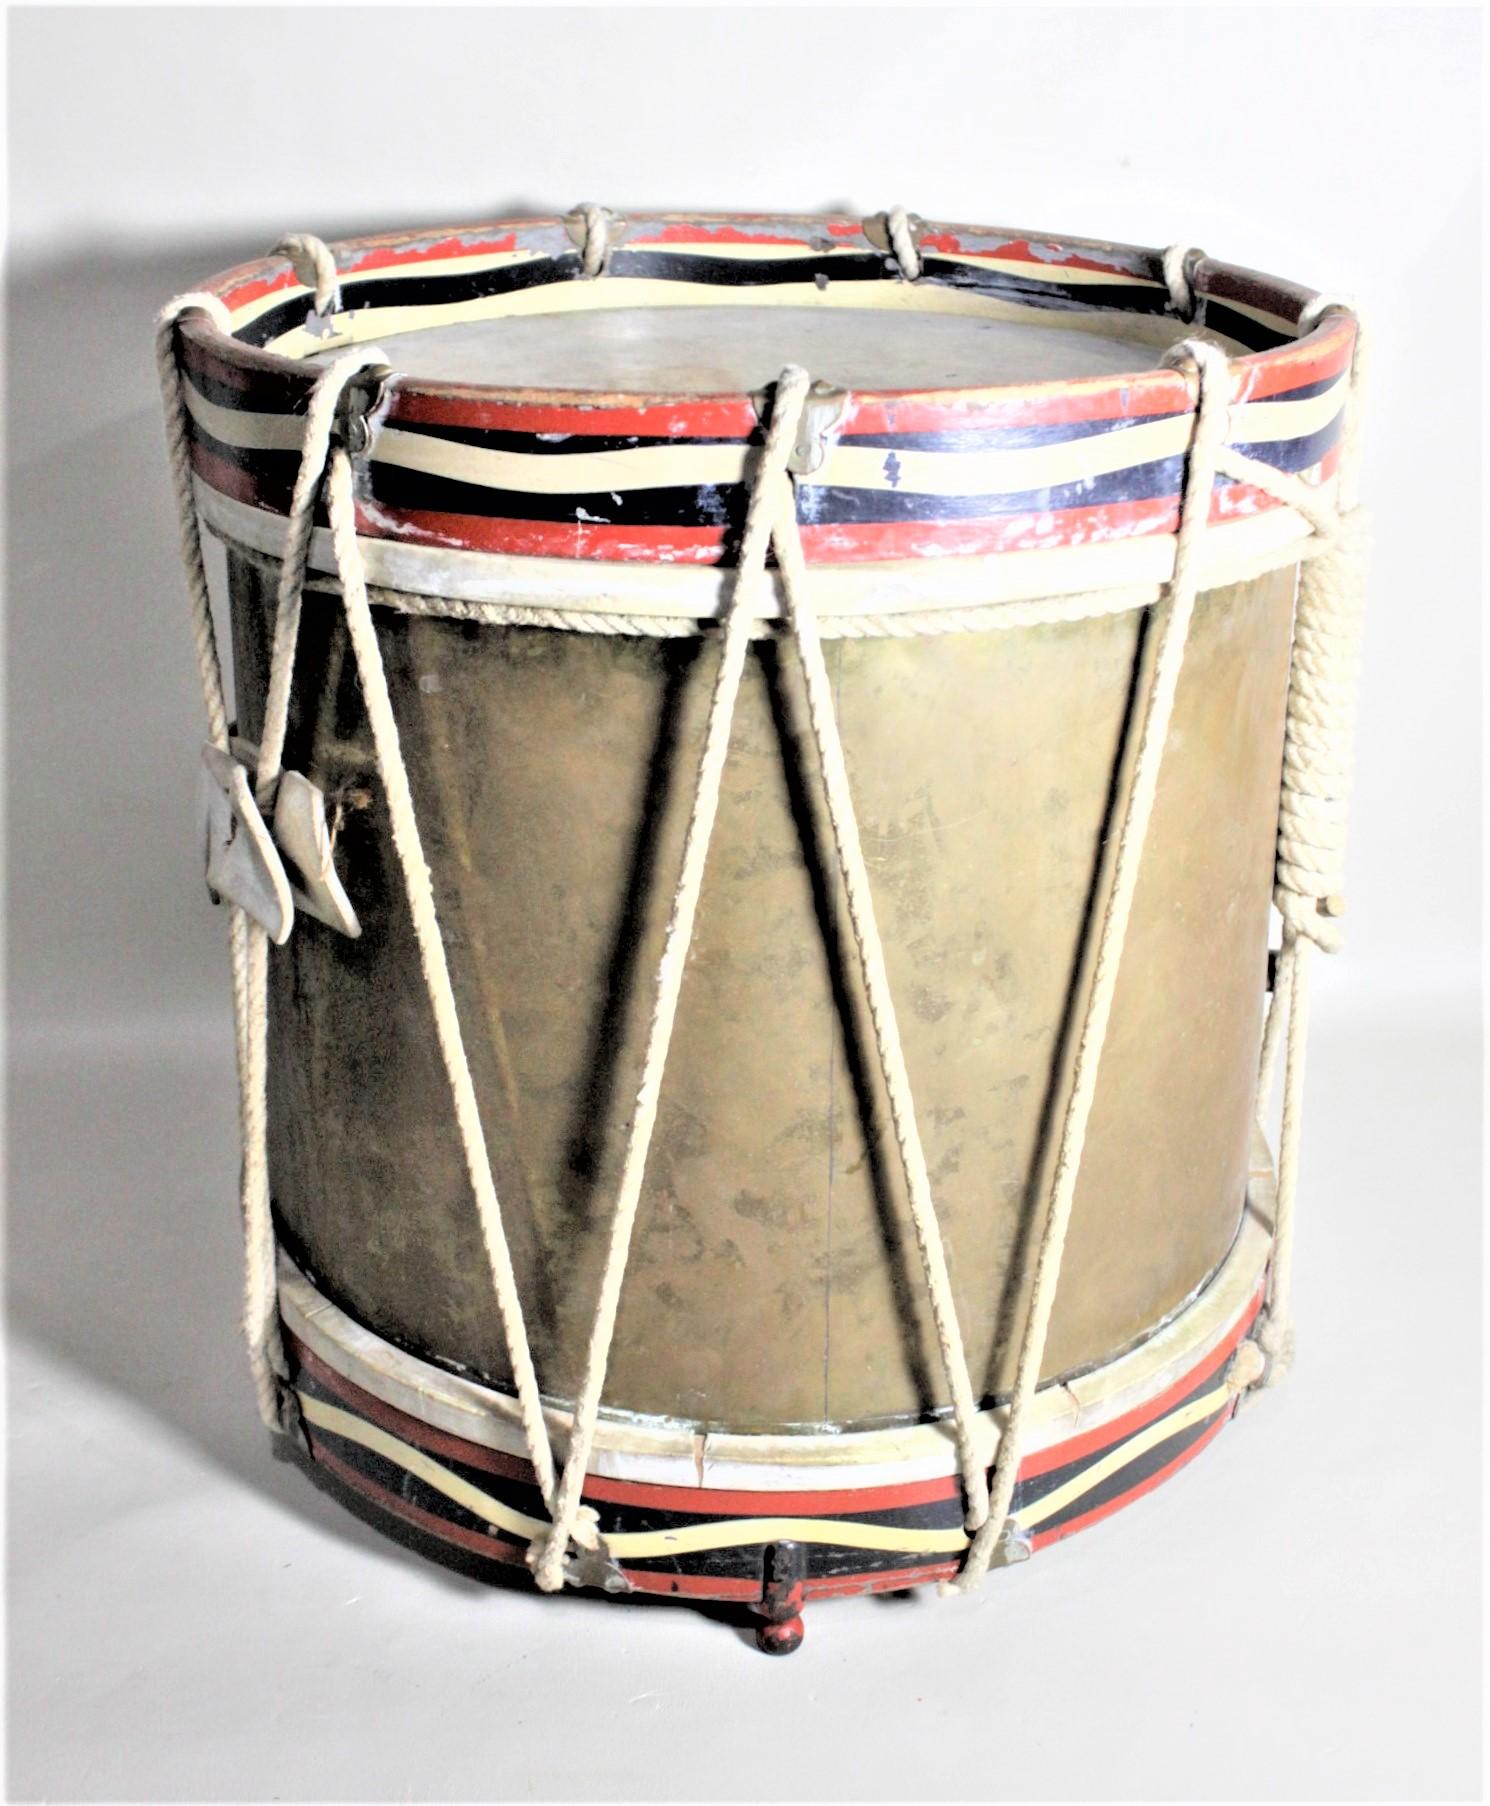 This interesting brass and metal marching band drum was made by the A.F Mathews & Co. of France in 1941 in a French Regimental style. The body of the drum is composed of brass and either rim is solid steel. The top and bottom are lashed together